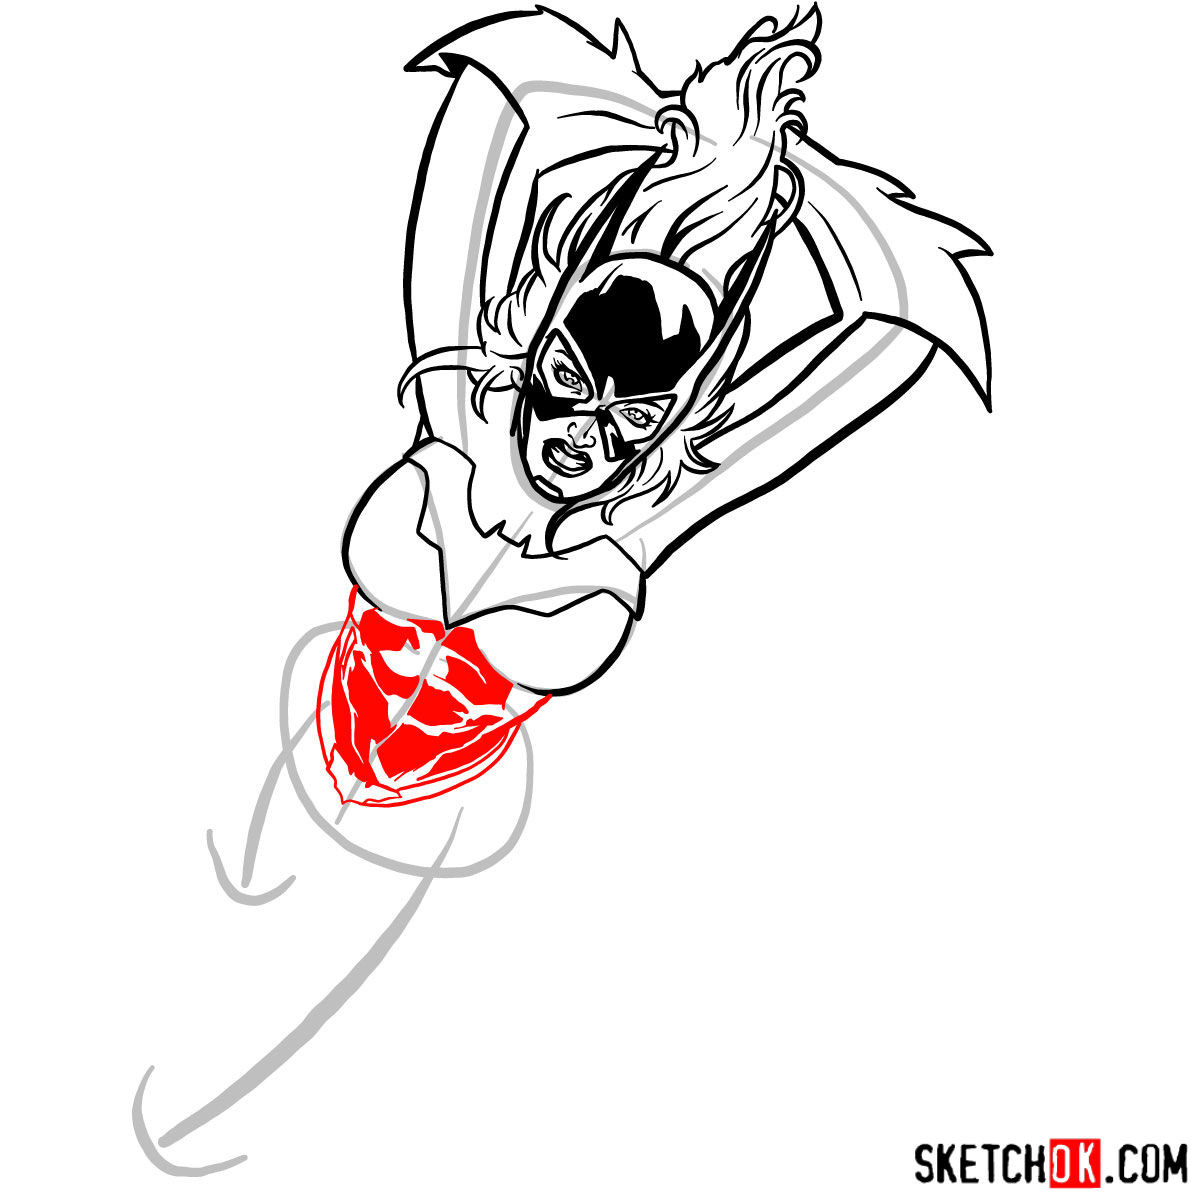 How to draw Batgirl from DC Comics - step 08